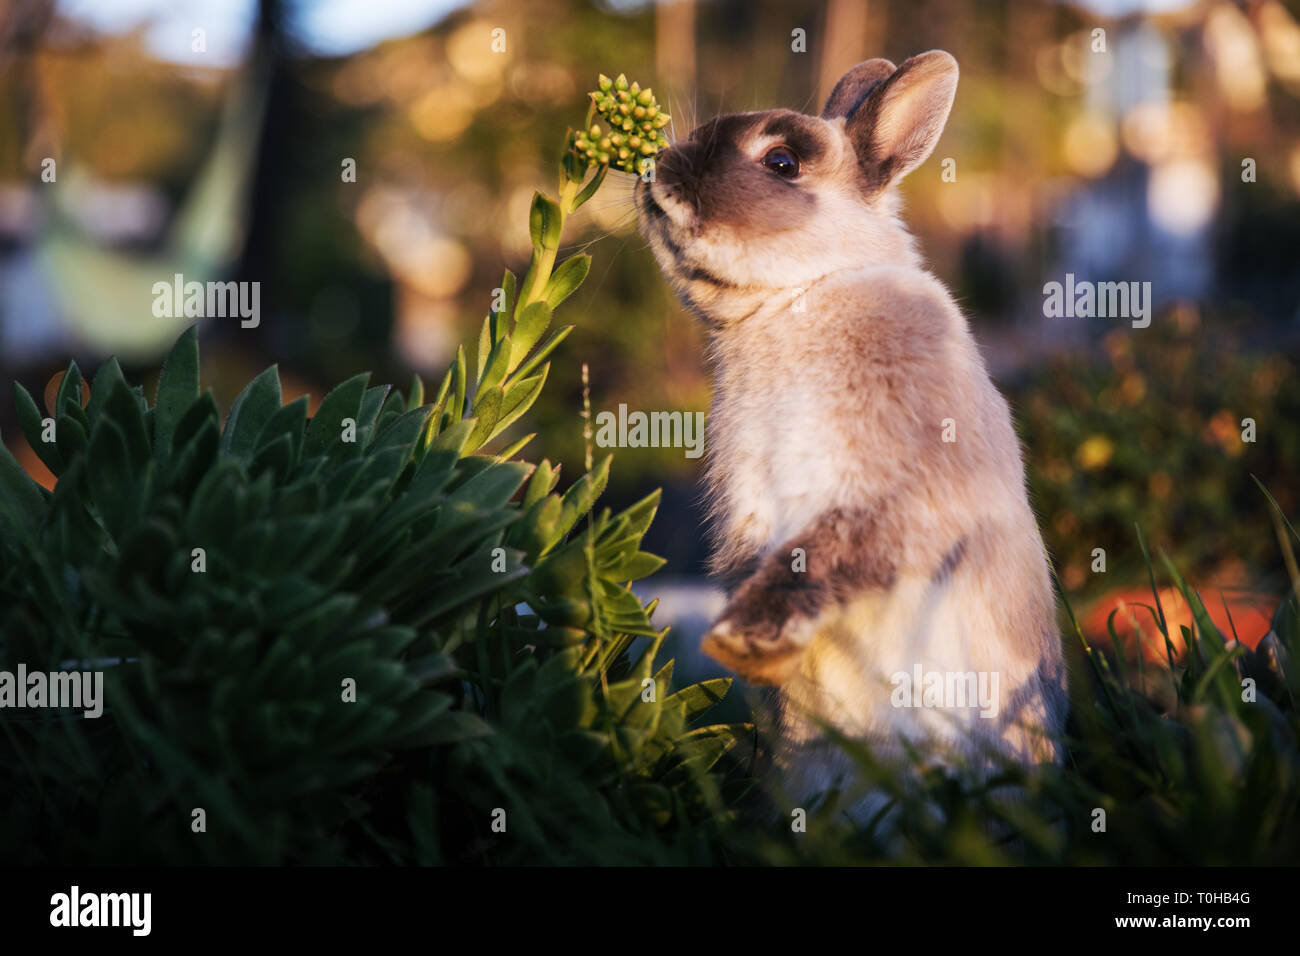 A brown and gray dwarf bunny standing on his hind legs in a garden, looking statuesque. Stock Photo